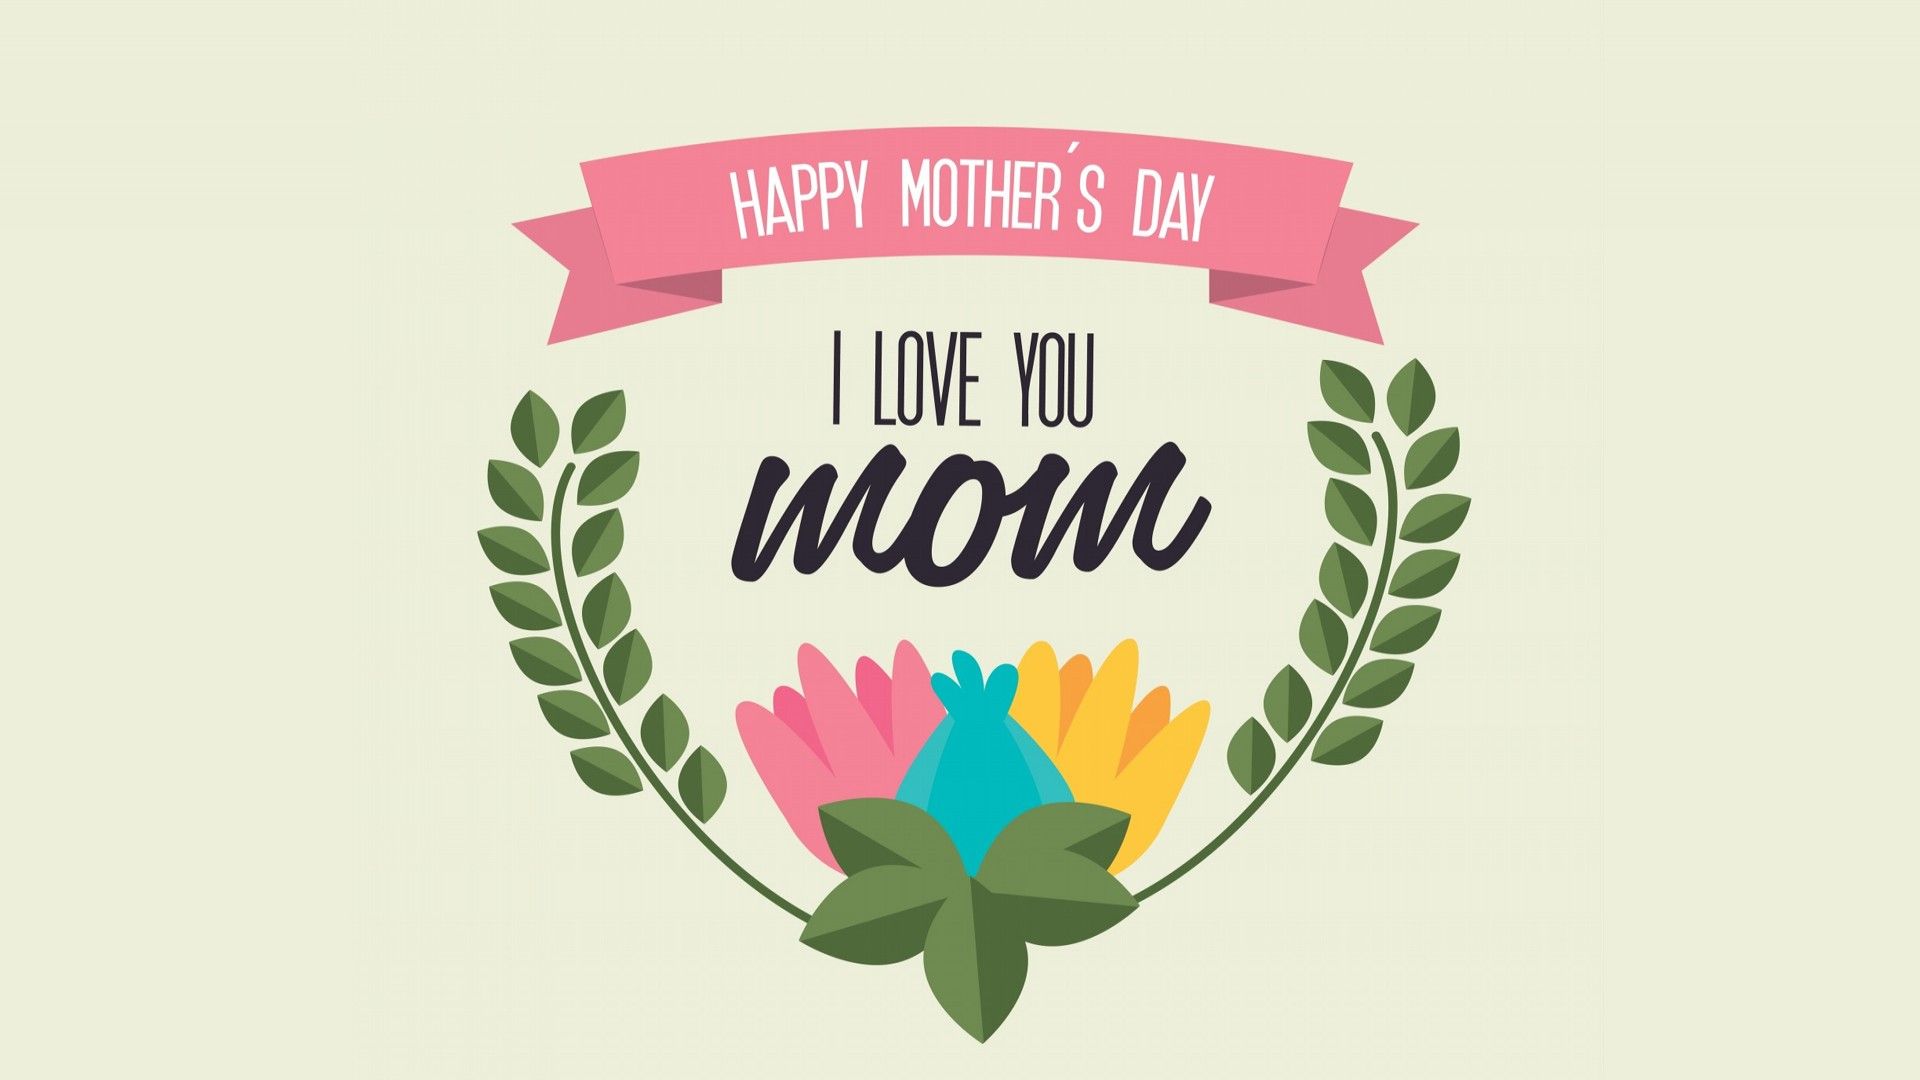 Happy Mothers Day 2018 Wallpaper